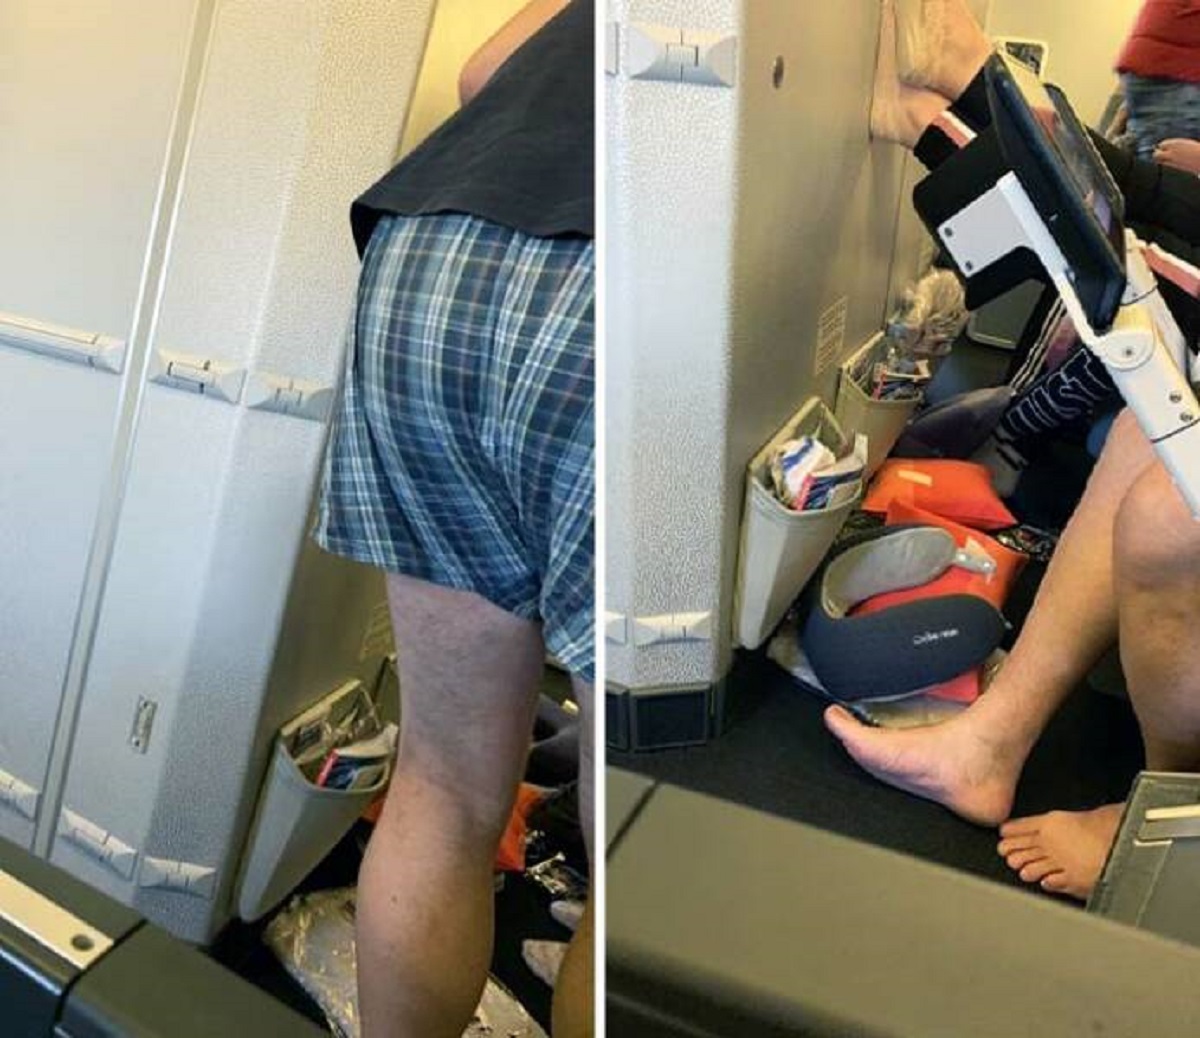 "The Man In The Seat Across From Me Has Taken His Pants Off For The Flight And Is Just In His Boxers. After That, He Also Removed His Socks"